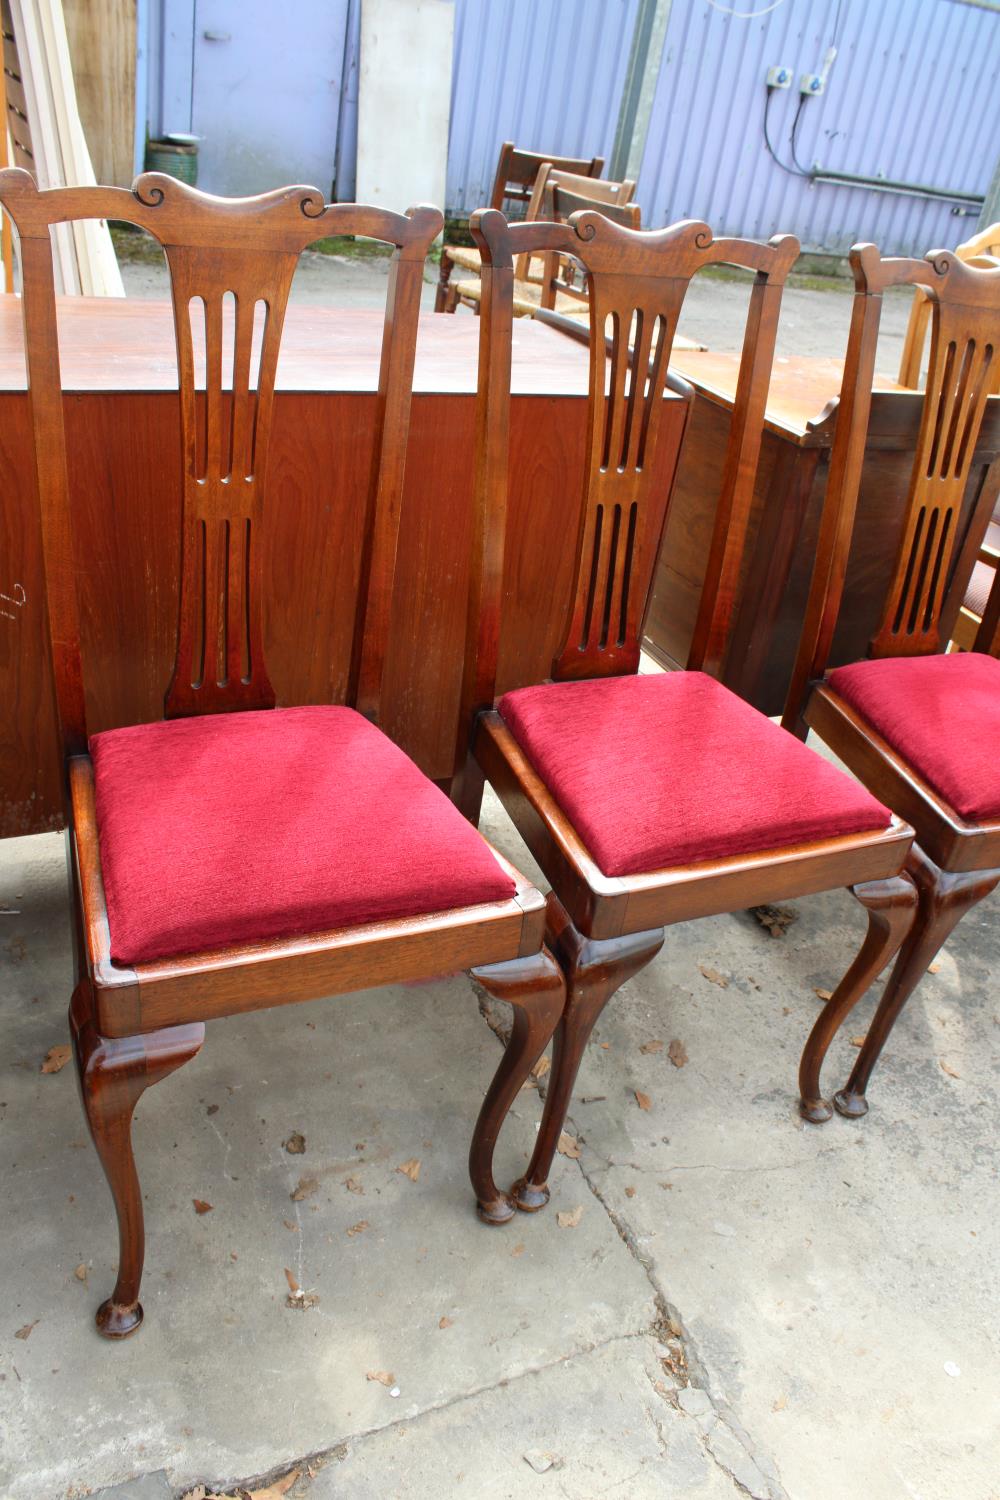 A SET OF FOUR EARLY 20TH CENTURY MAHOGANY DINING CHAIRS WITH SPLAT BACKS ON CABRIOLE LEGS - Image 2 of 2